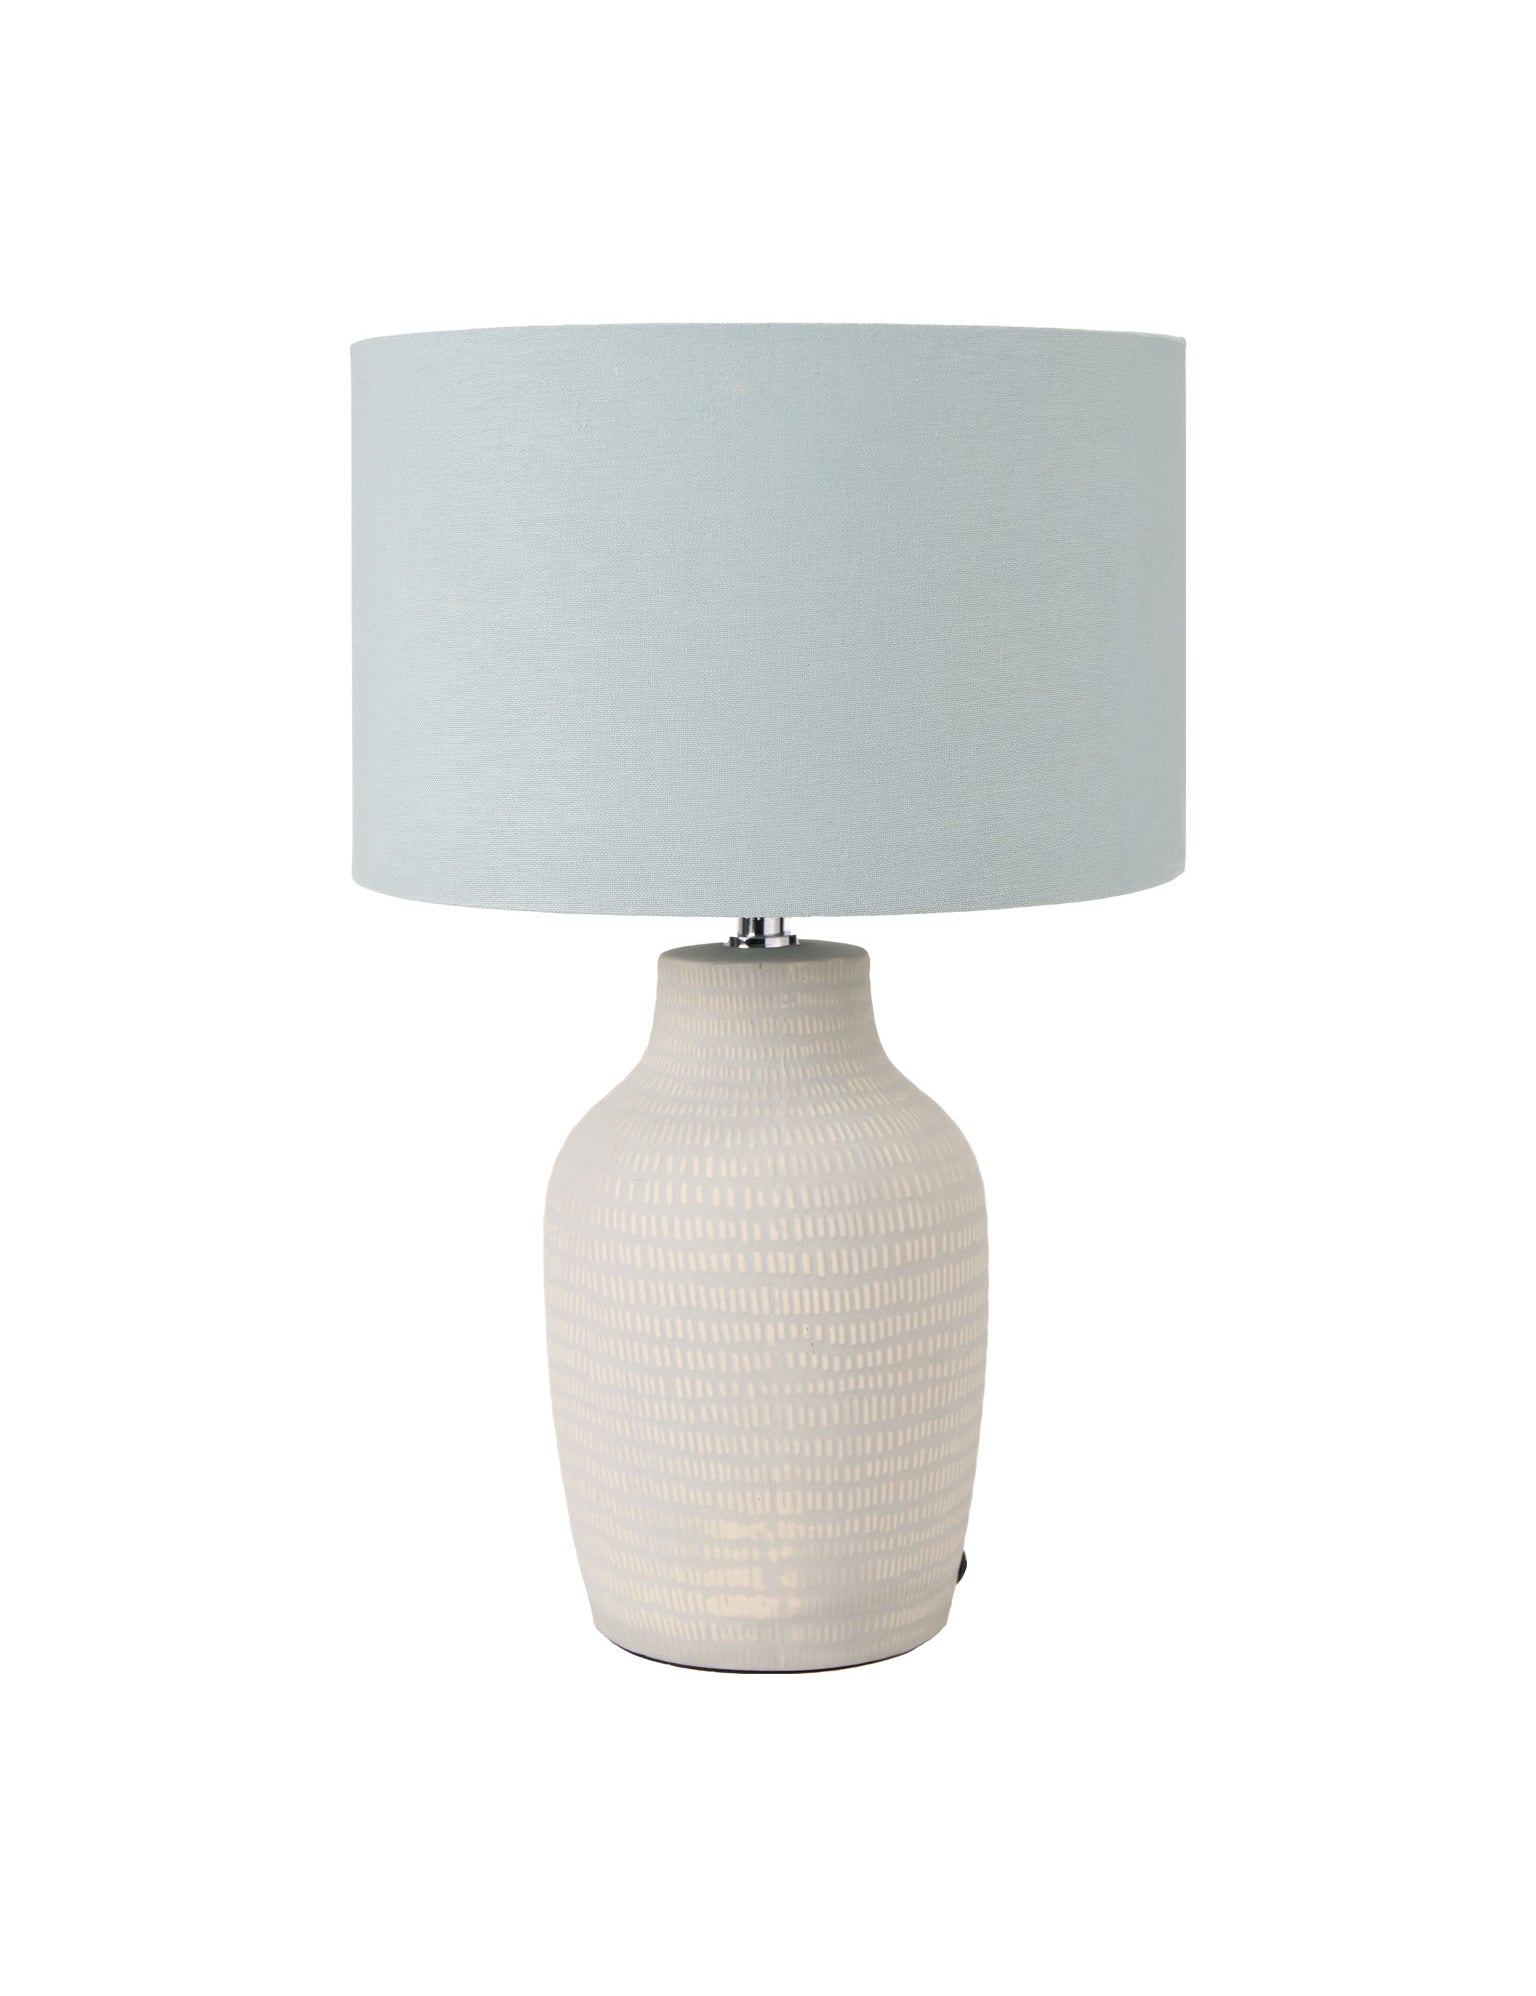 Duck Egg Textured Tall Ceramic Table Lamp